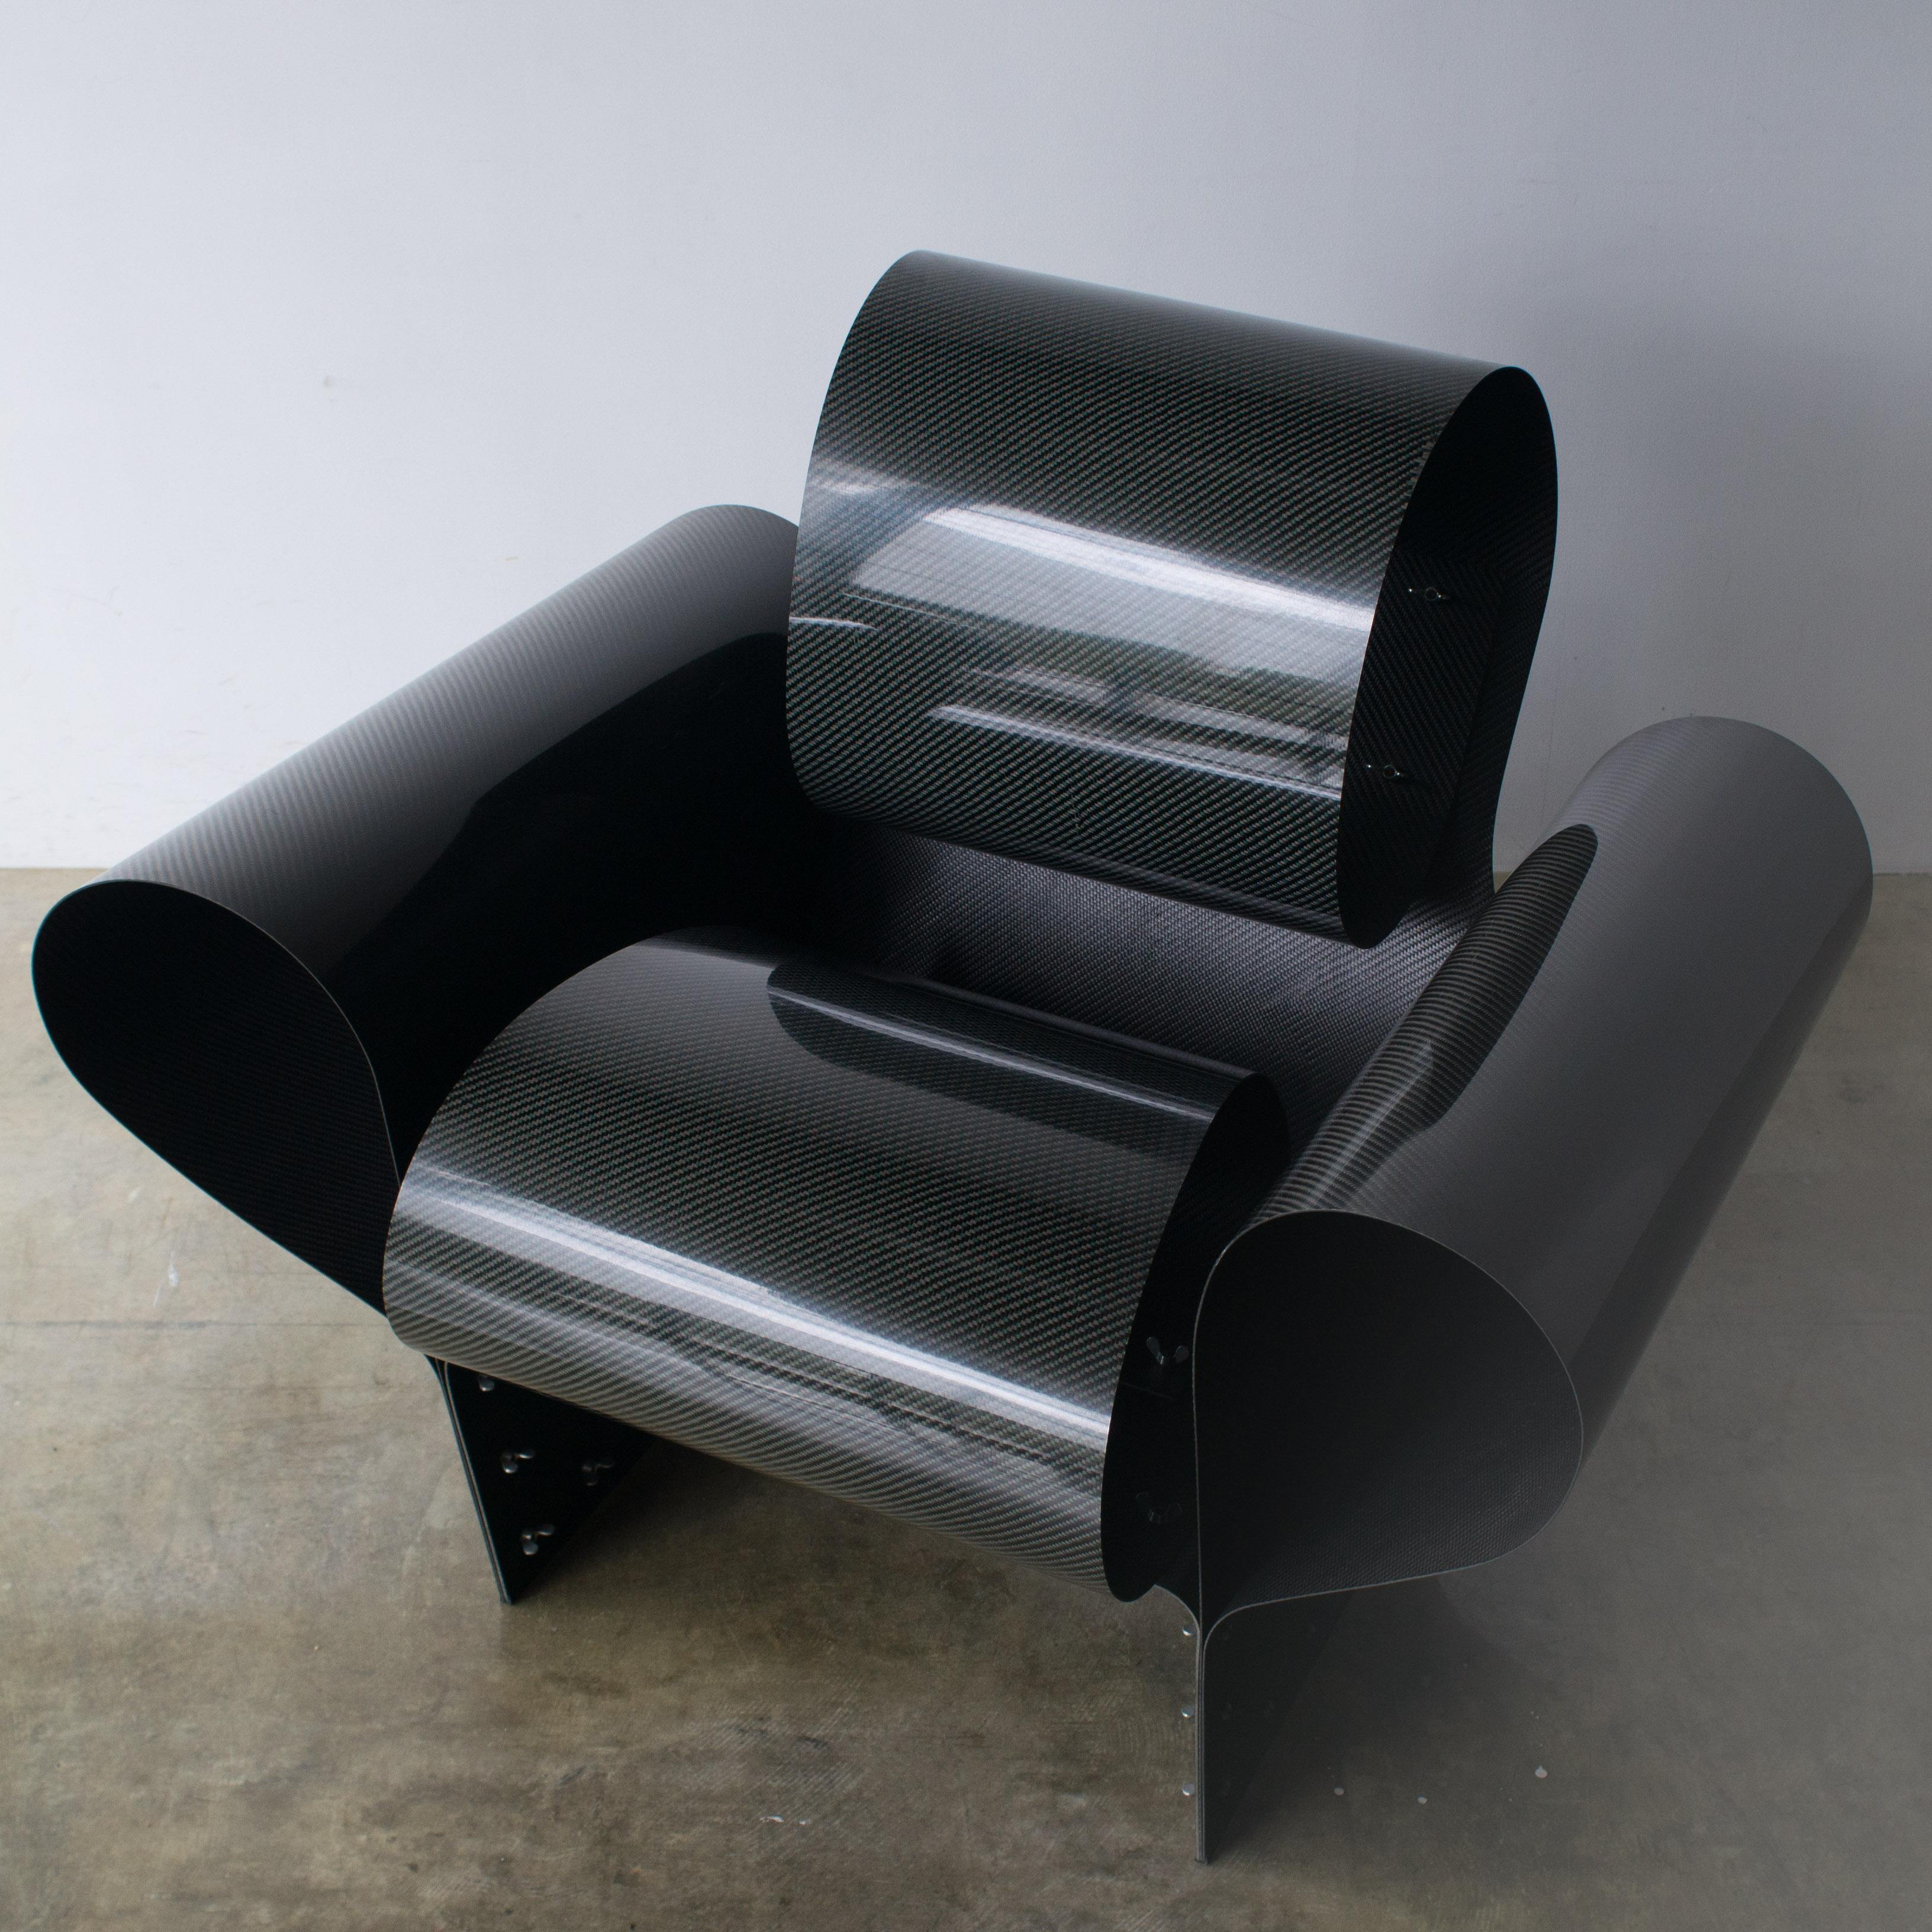 Bad tempered chair designed by Ron Arad.
Lounge chair made of curved carbon fiber board. Limited edition 39/1000
Vitra quit producing it in 2009. Produced numbers until that time were less than 200. 

      